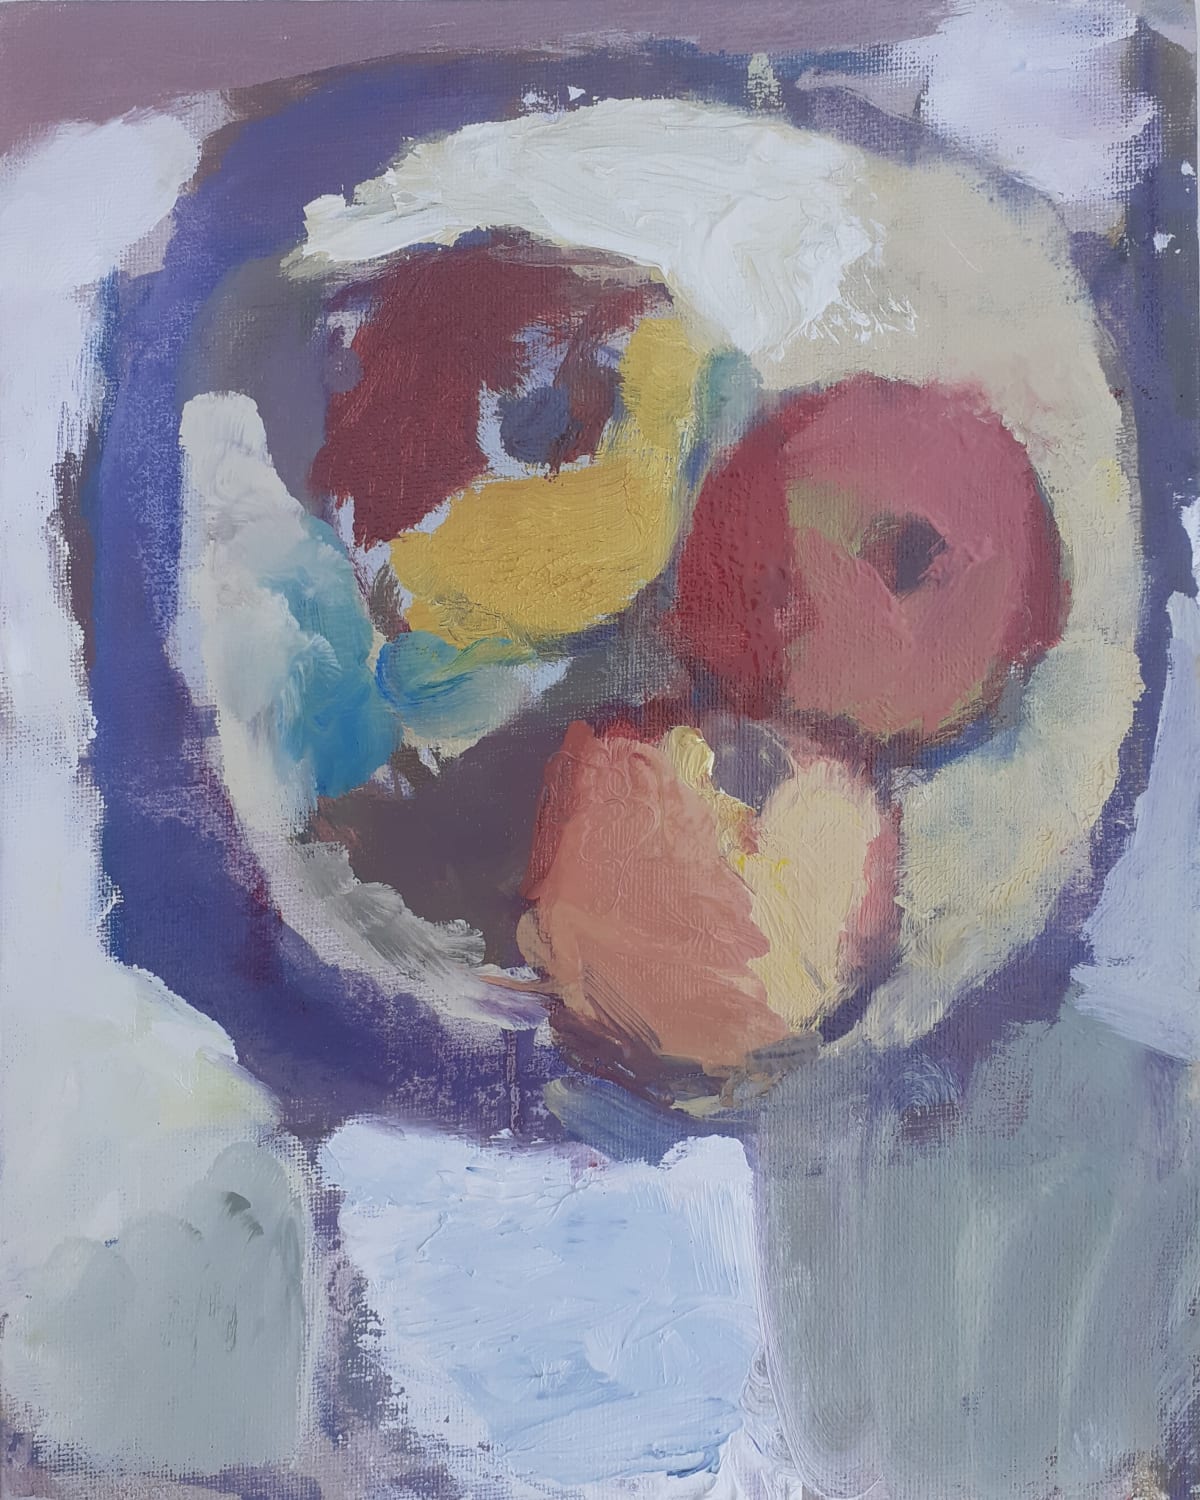 “Painting, Passover and Pears” – Michael Weller